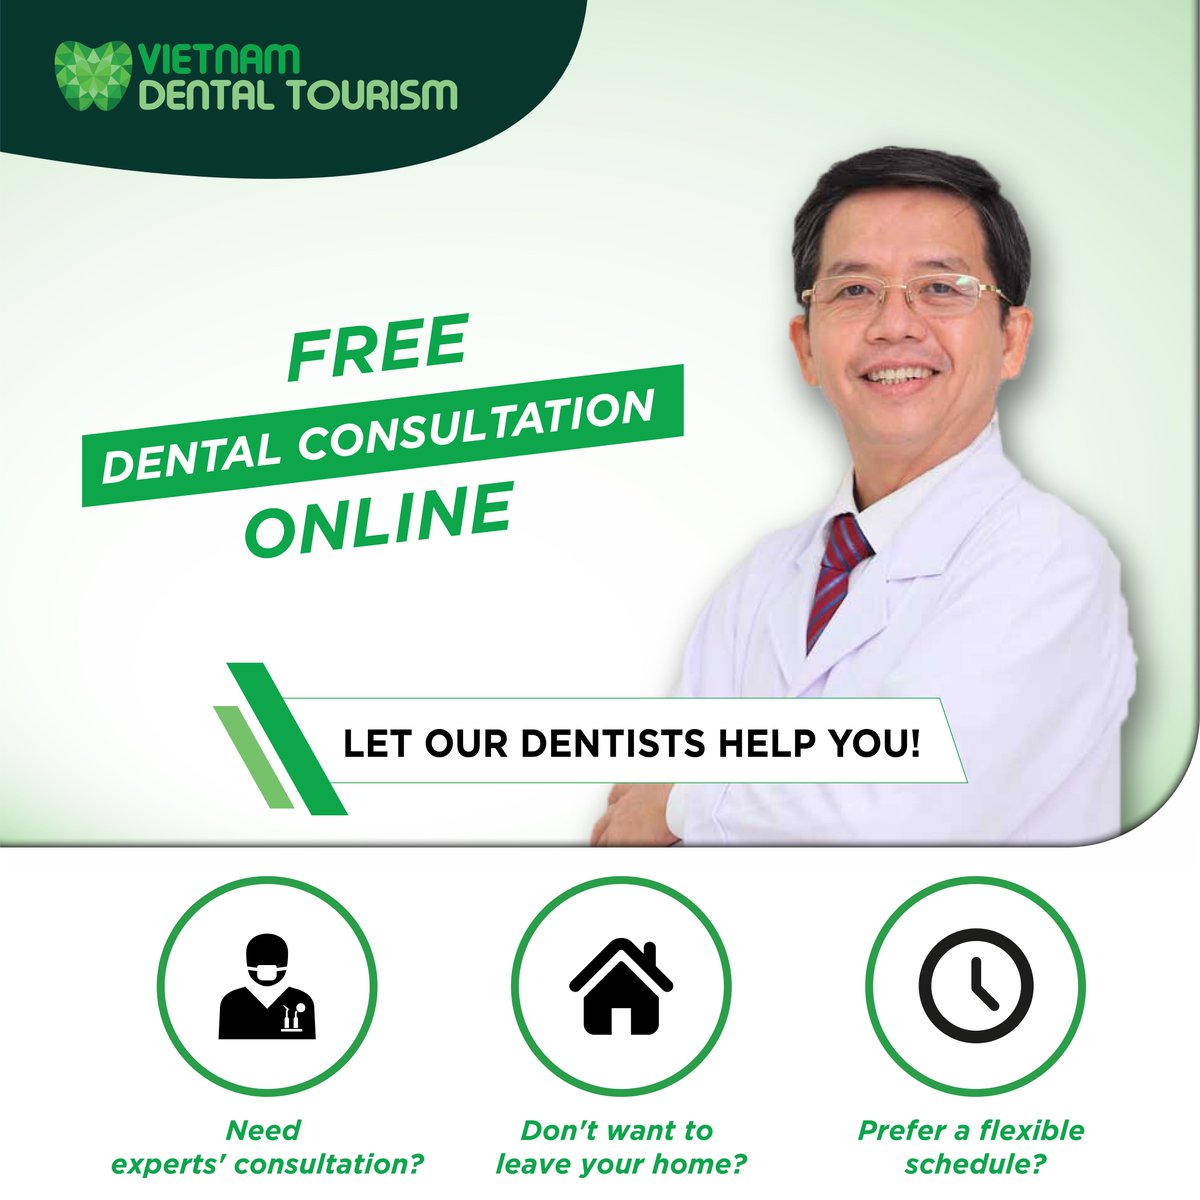 Make use of #socialdistance benefits with free online consultation with our top dentists. Tooth pain? Second opinion? Remake consideration? 👄 Ask our dentists at: buff.ly/2UVsj6l
#dentalconsultation #onlineconsultation #freecheckup